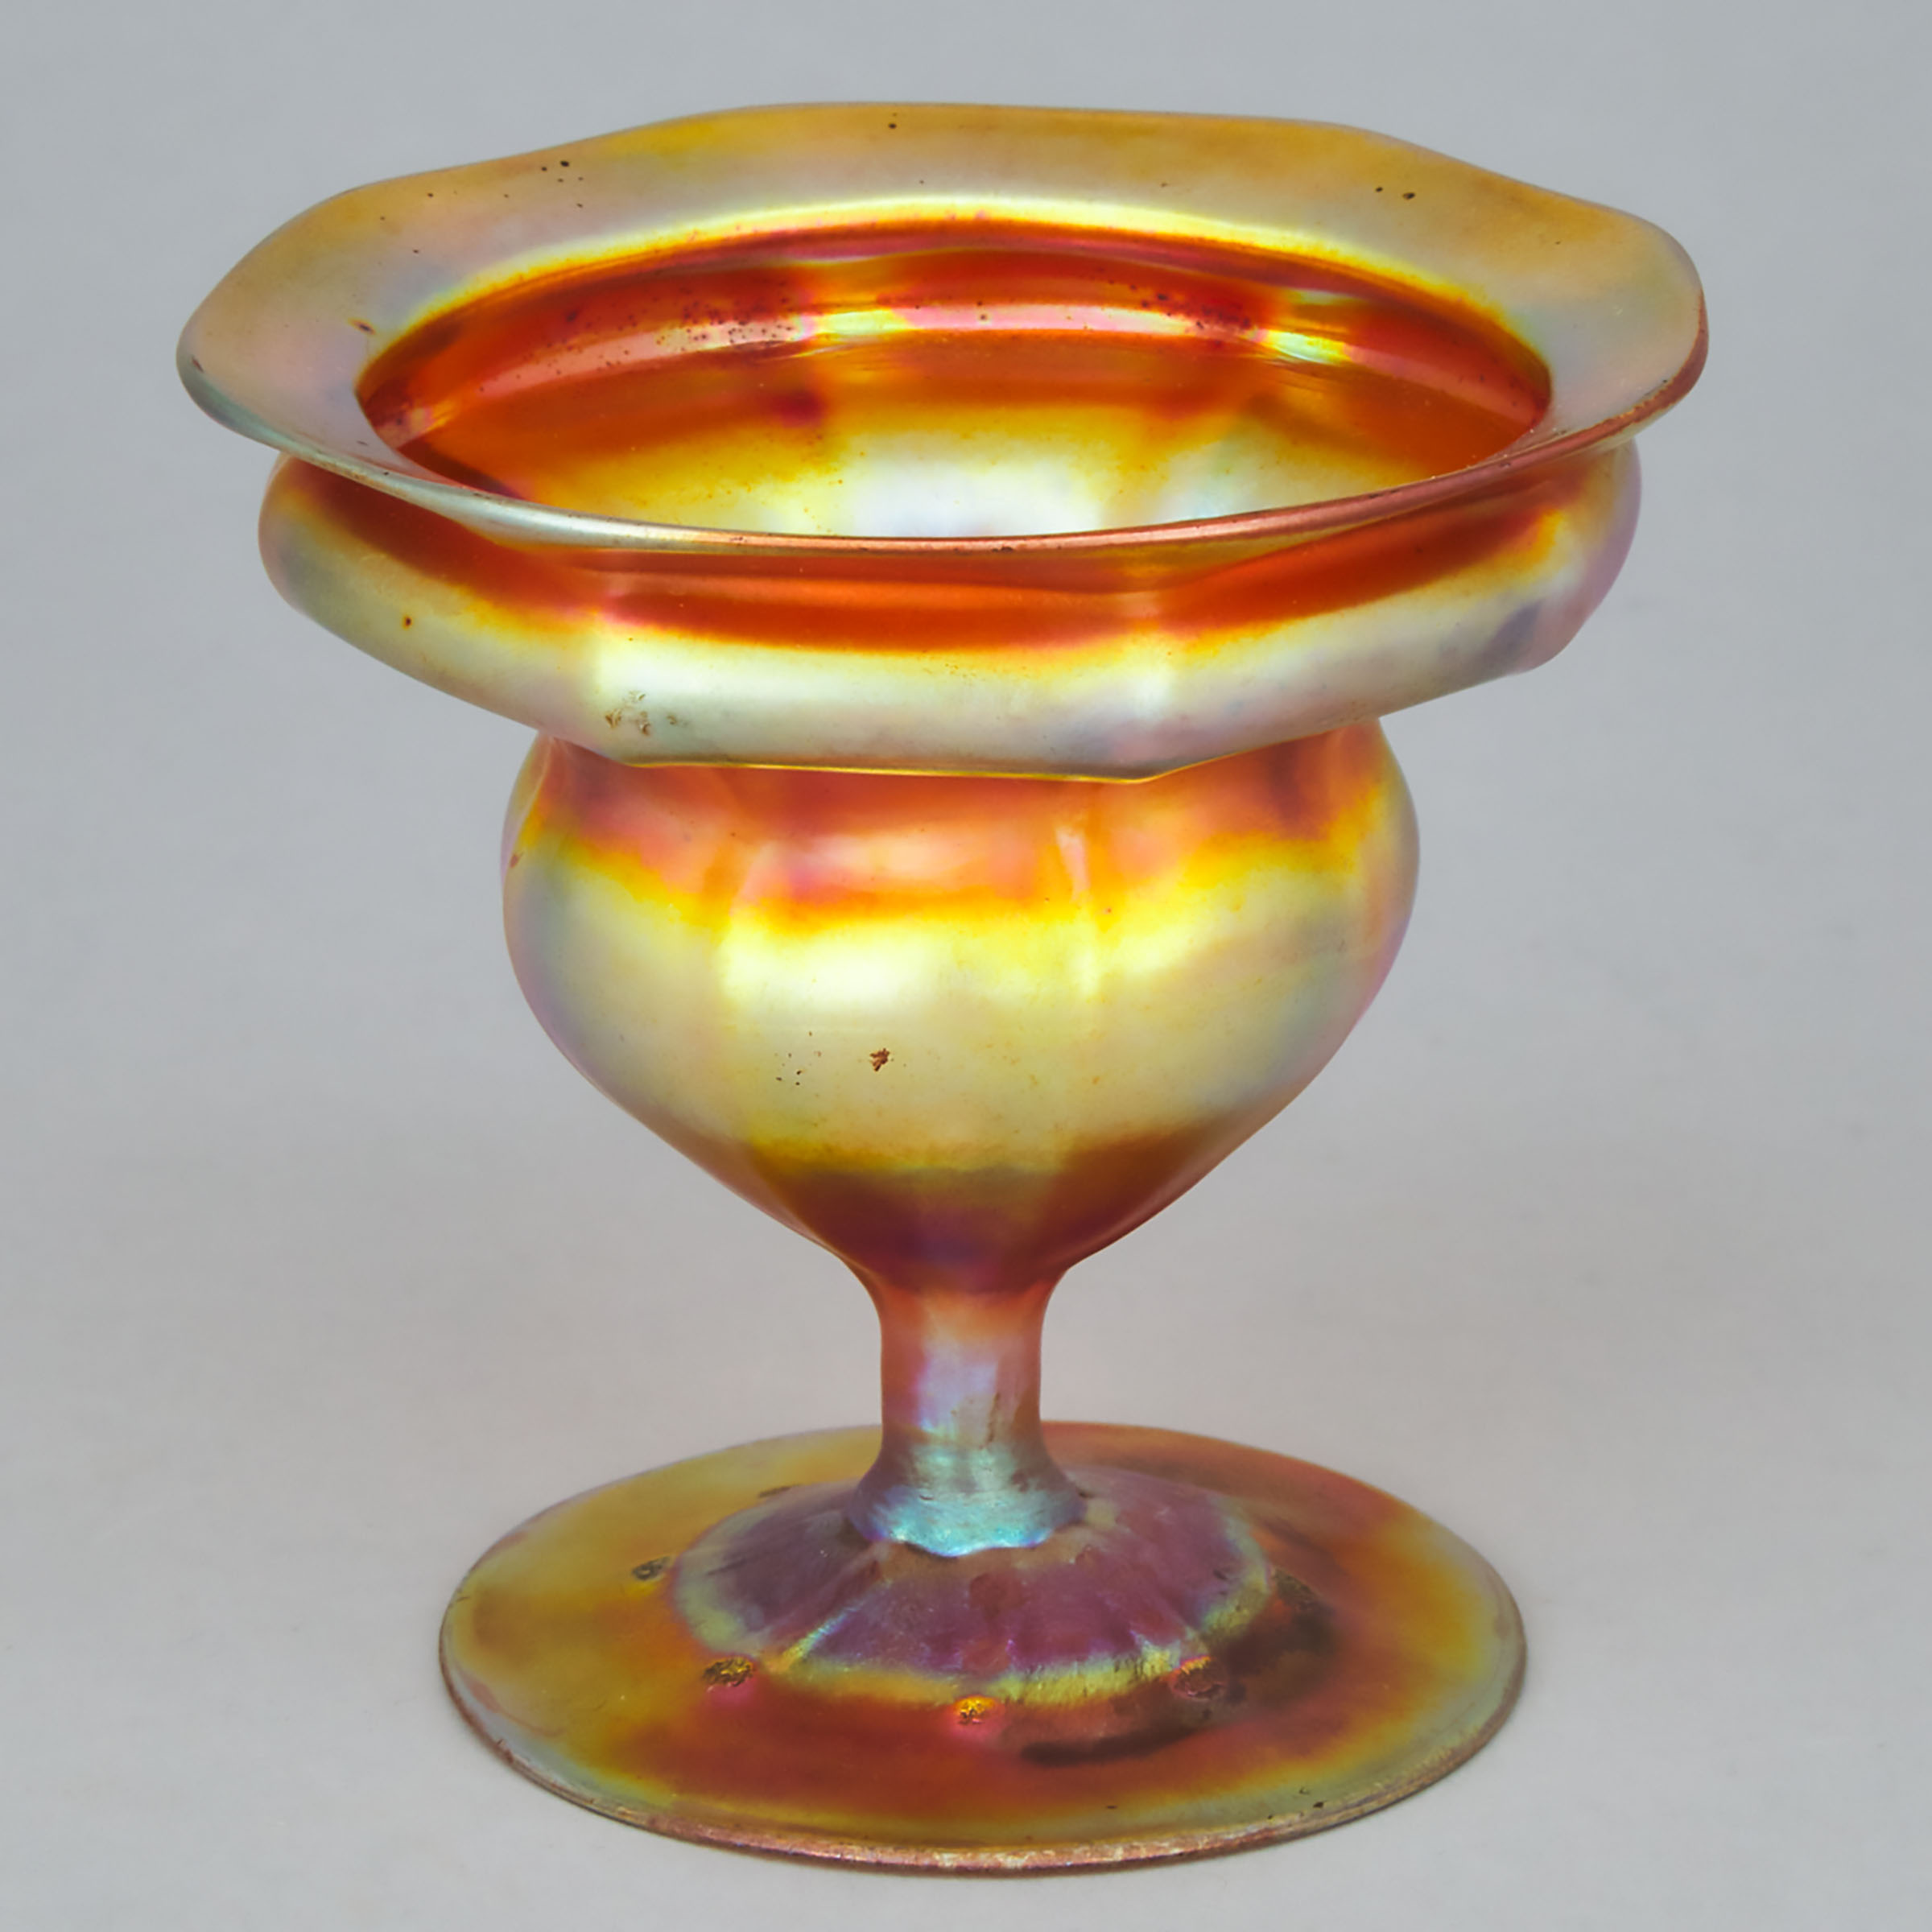 Tiffany 'Favrile' Small Iridescent Pedestal-Footed Glass Vase, early 20th century